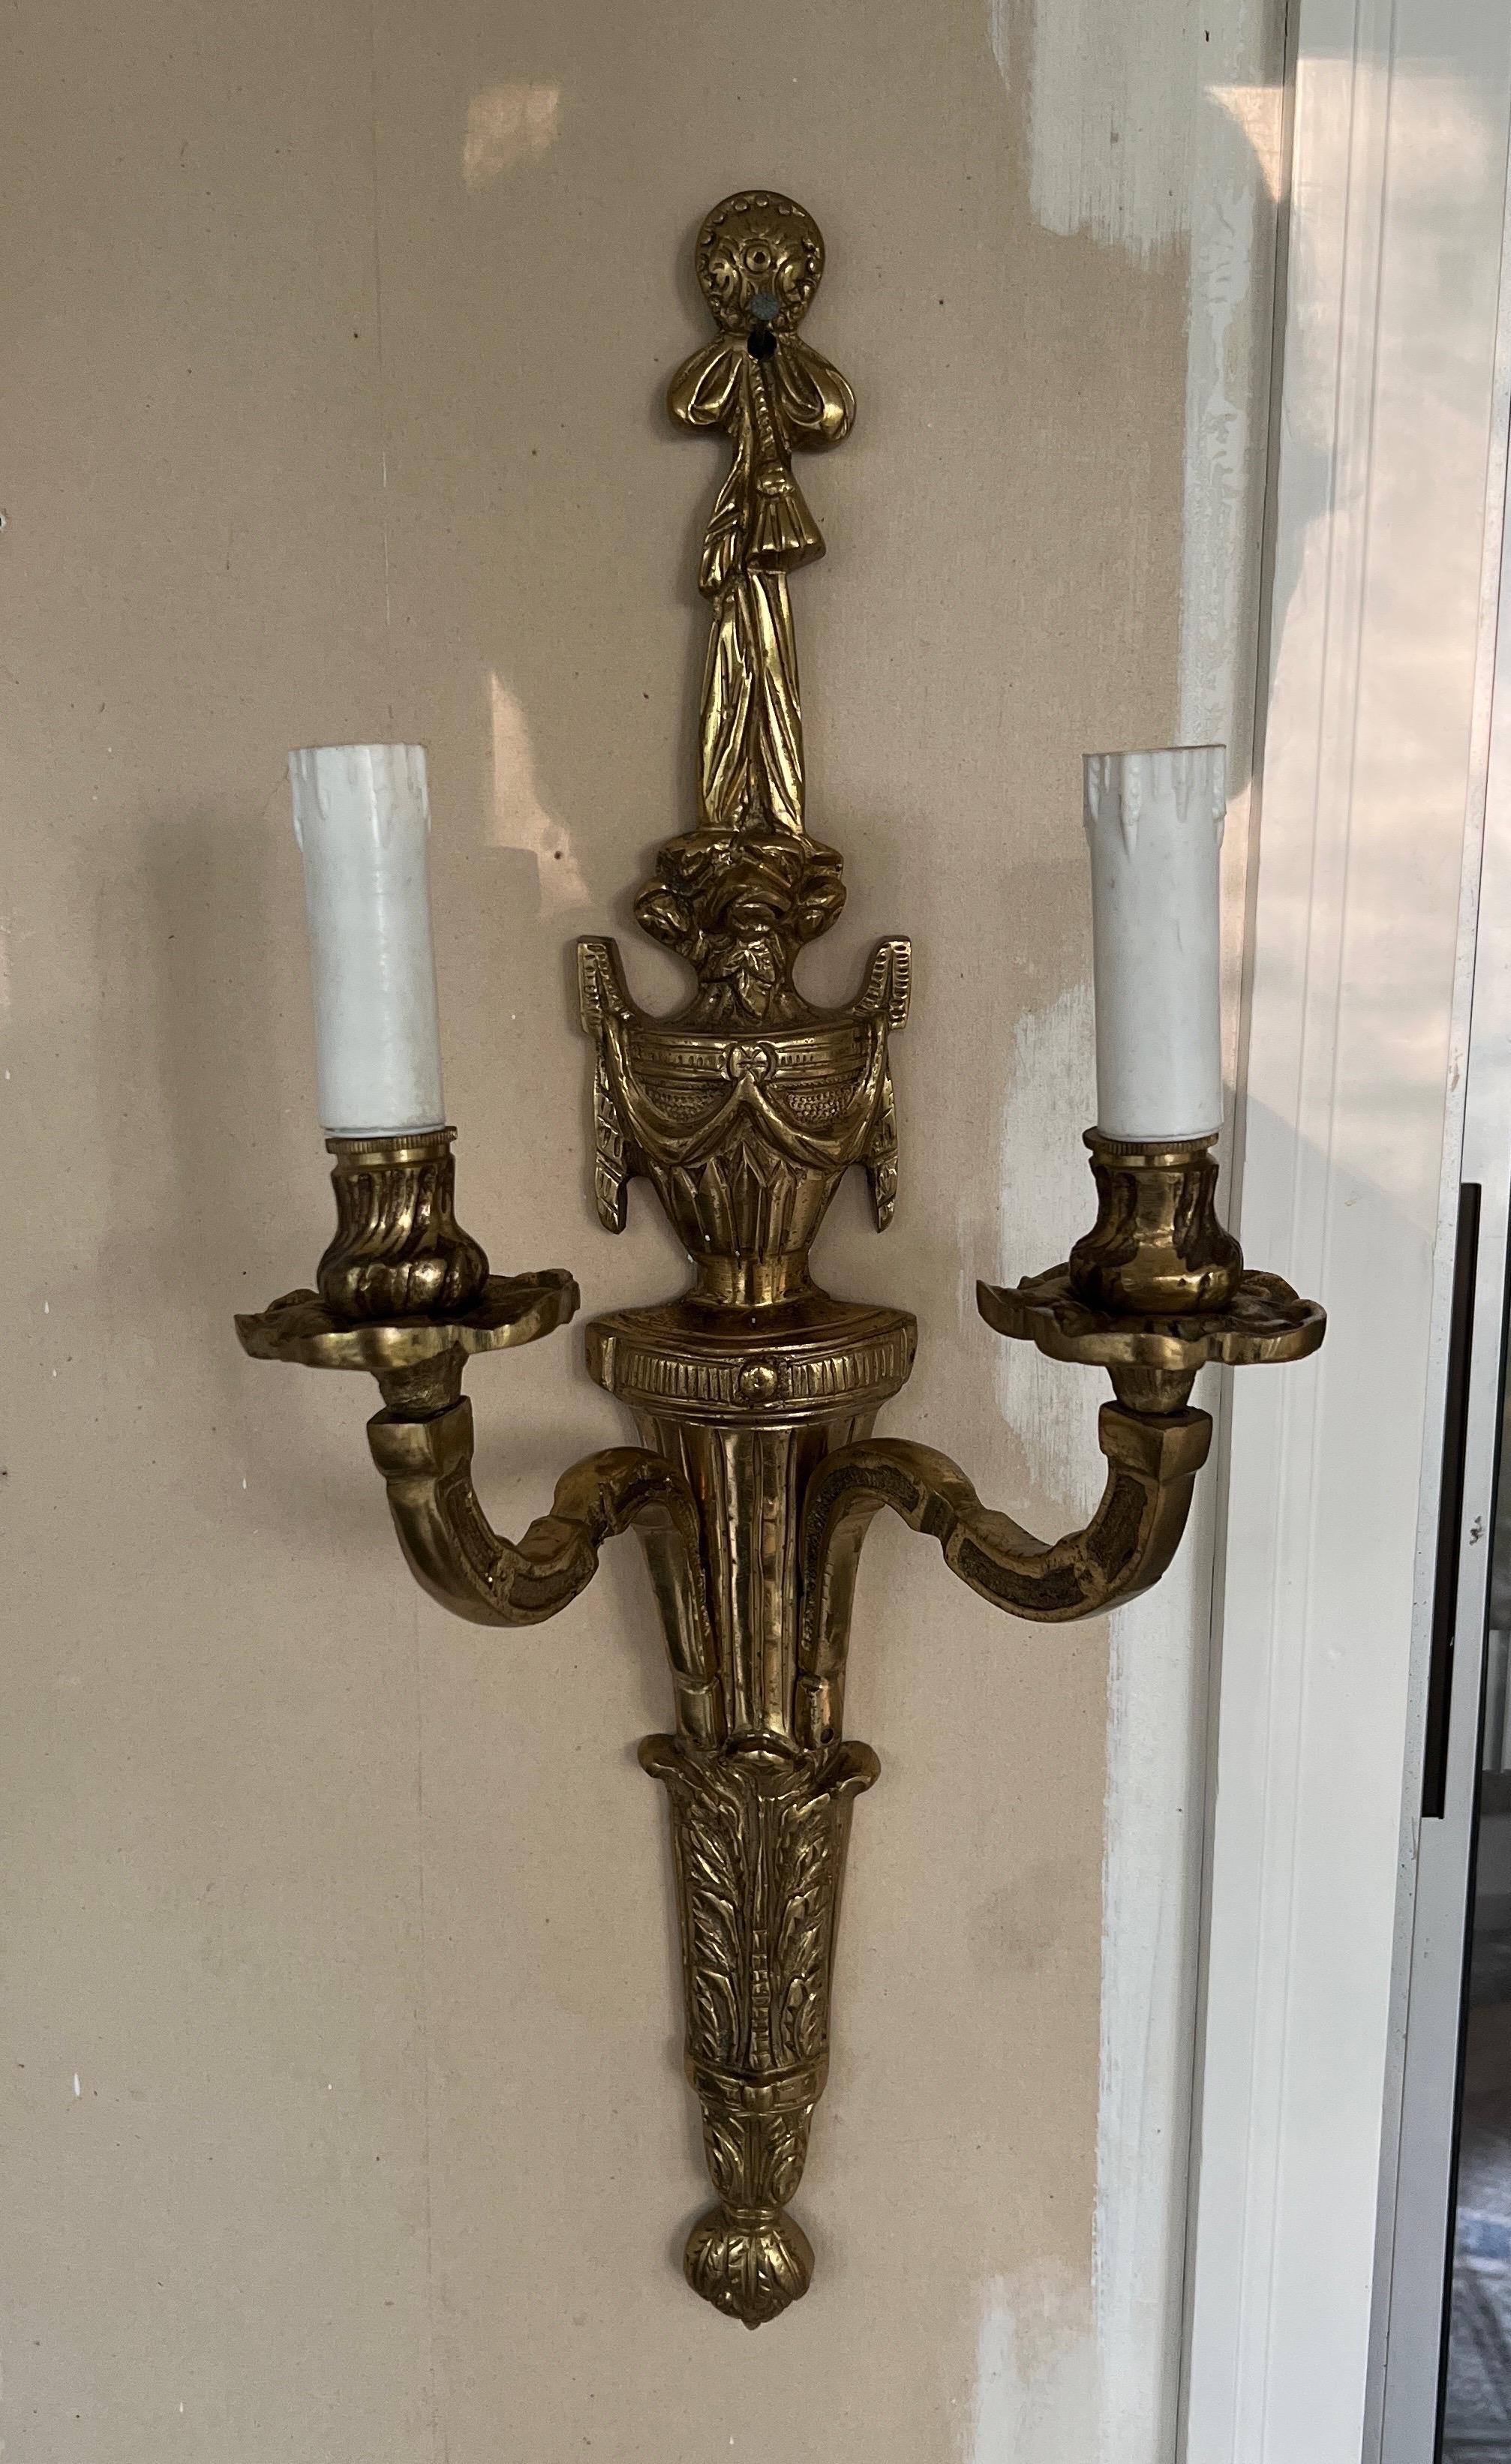 Italian, 20th century. 

A pair of gilt bronze wall sconces with traditional urn form body, draped rope header and two arms with faux wax candle covers. Marked to verso 